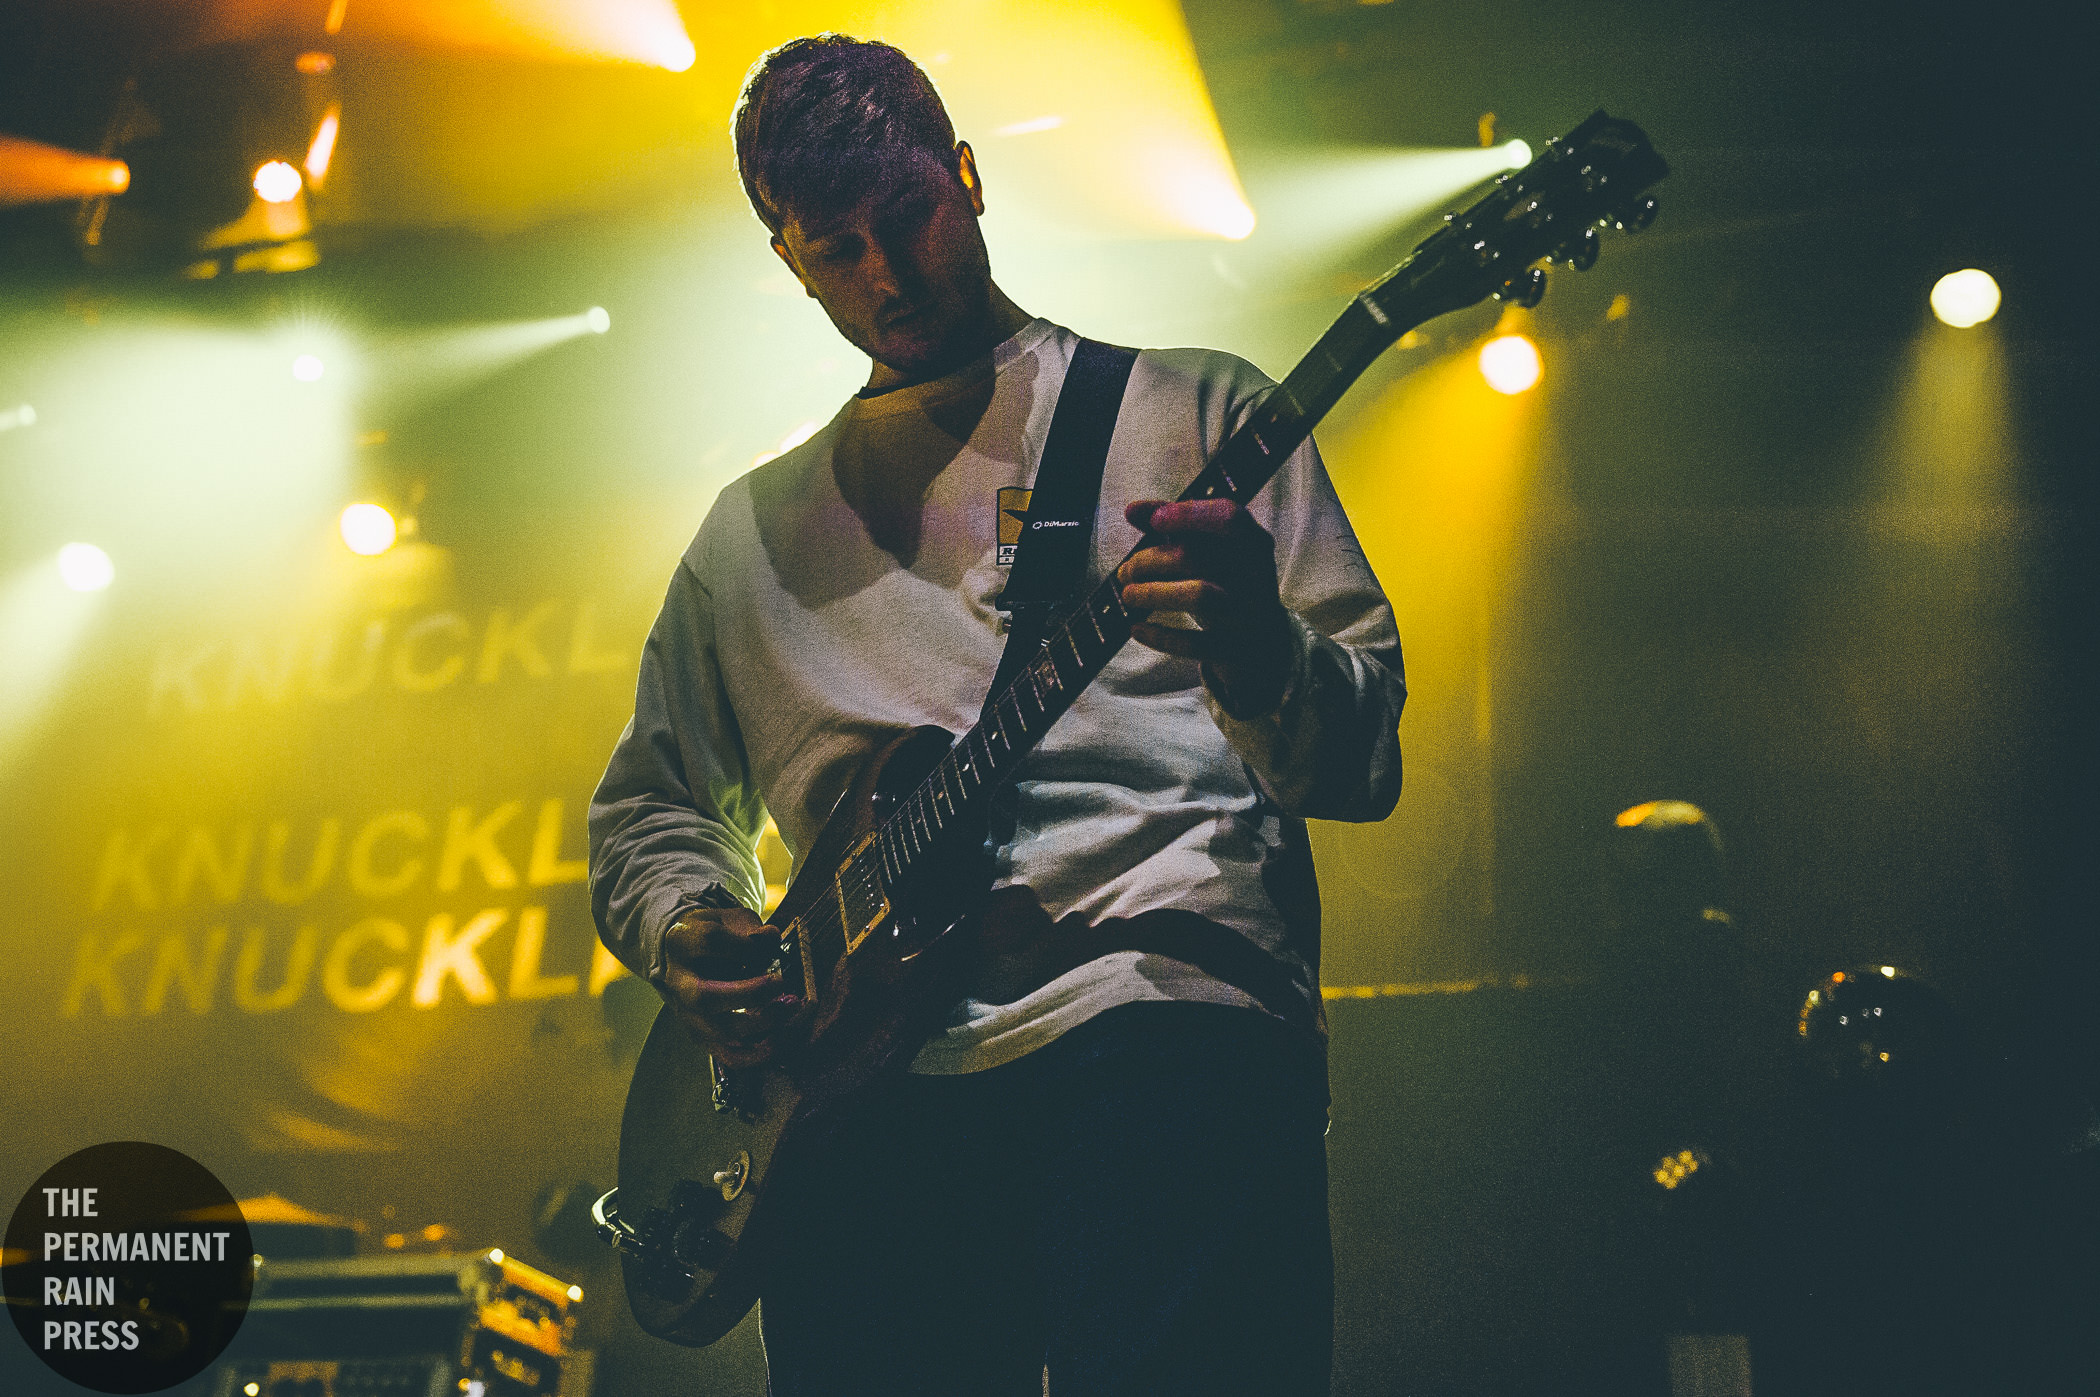 2_Knuckle_Puck-Vogue_Theatre-Timothy_Nguyen-20170413 (10 of 15).jpg